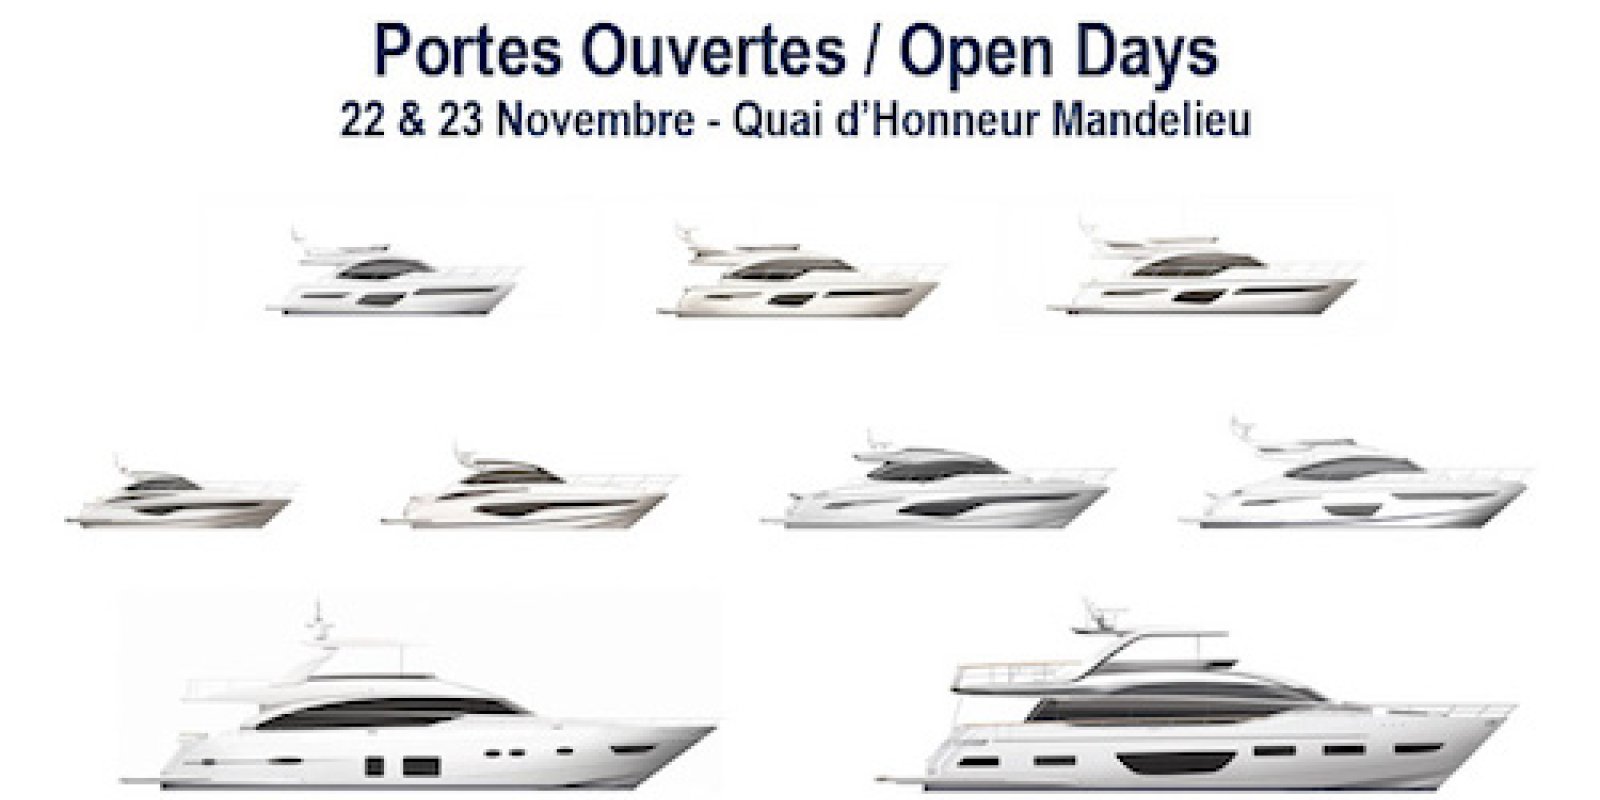 Open Days PRINCESS Yachts France and FJORD Côte d'Azur - 22nd to 24th November